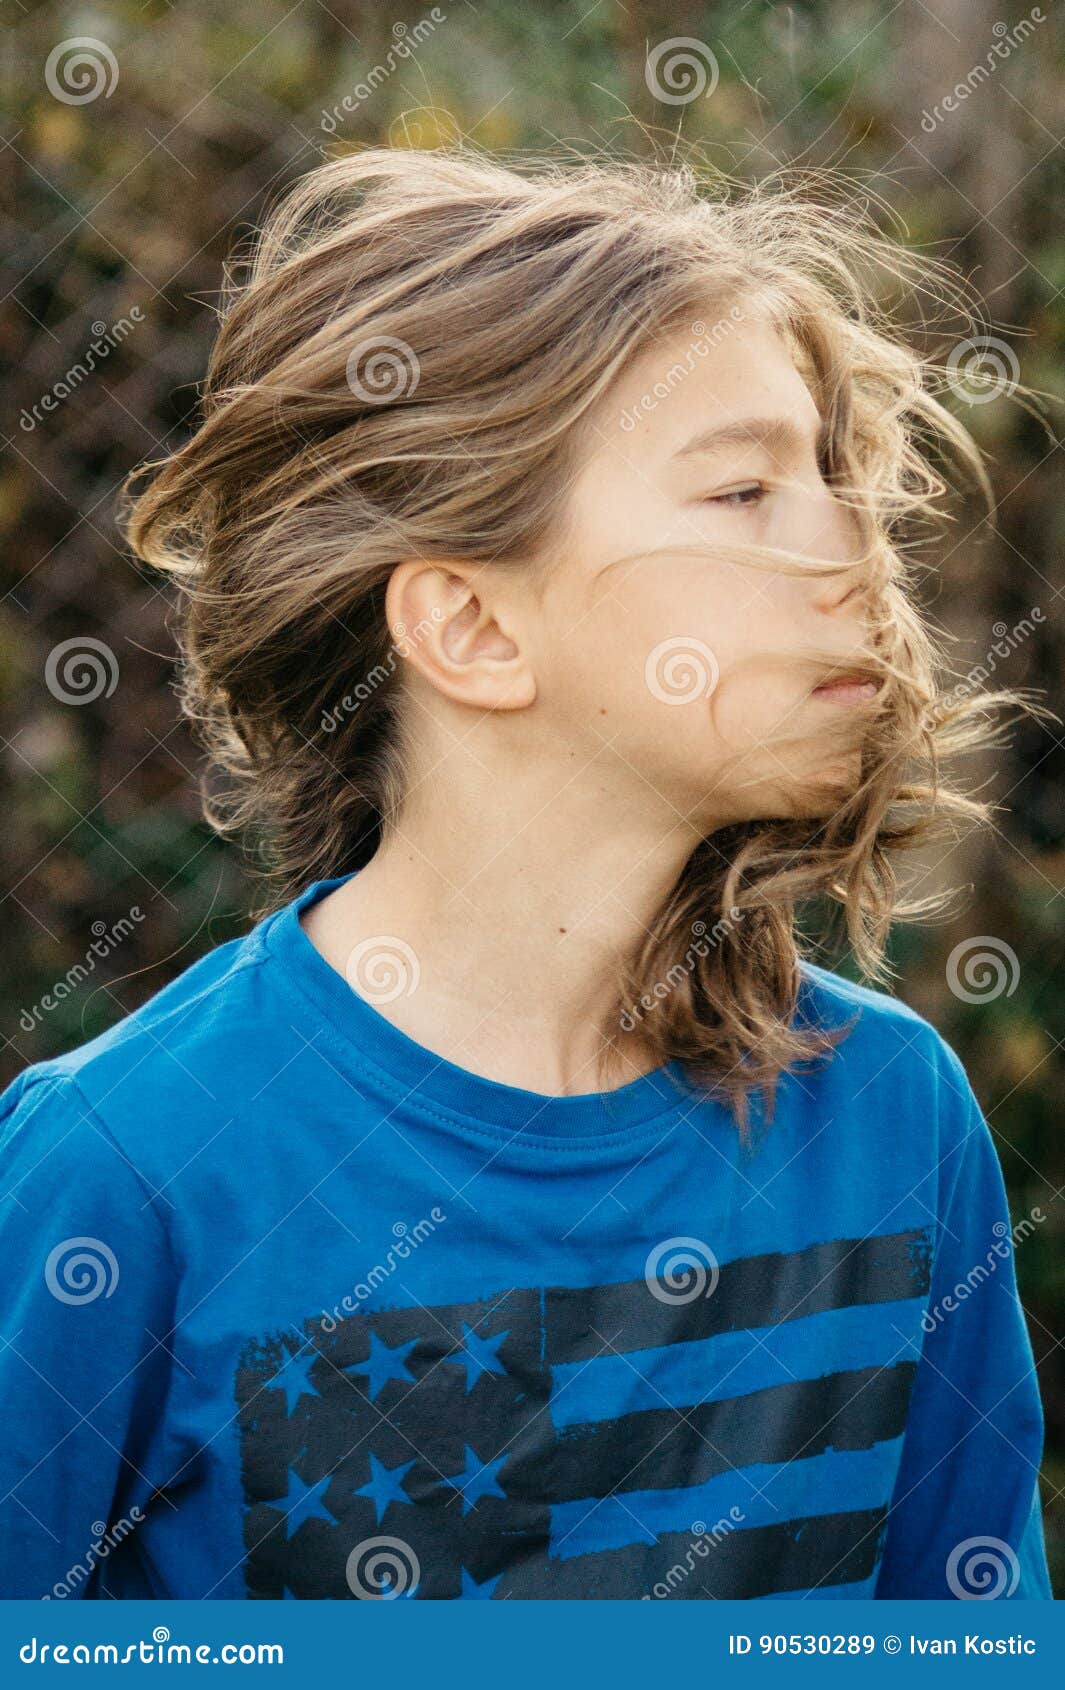 Boy with long hair stock image. Image of beautiful, dramatic - 90530289